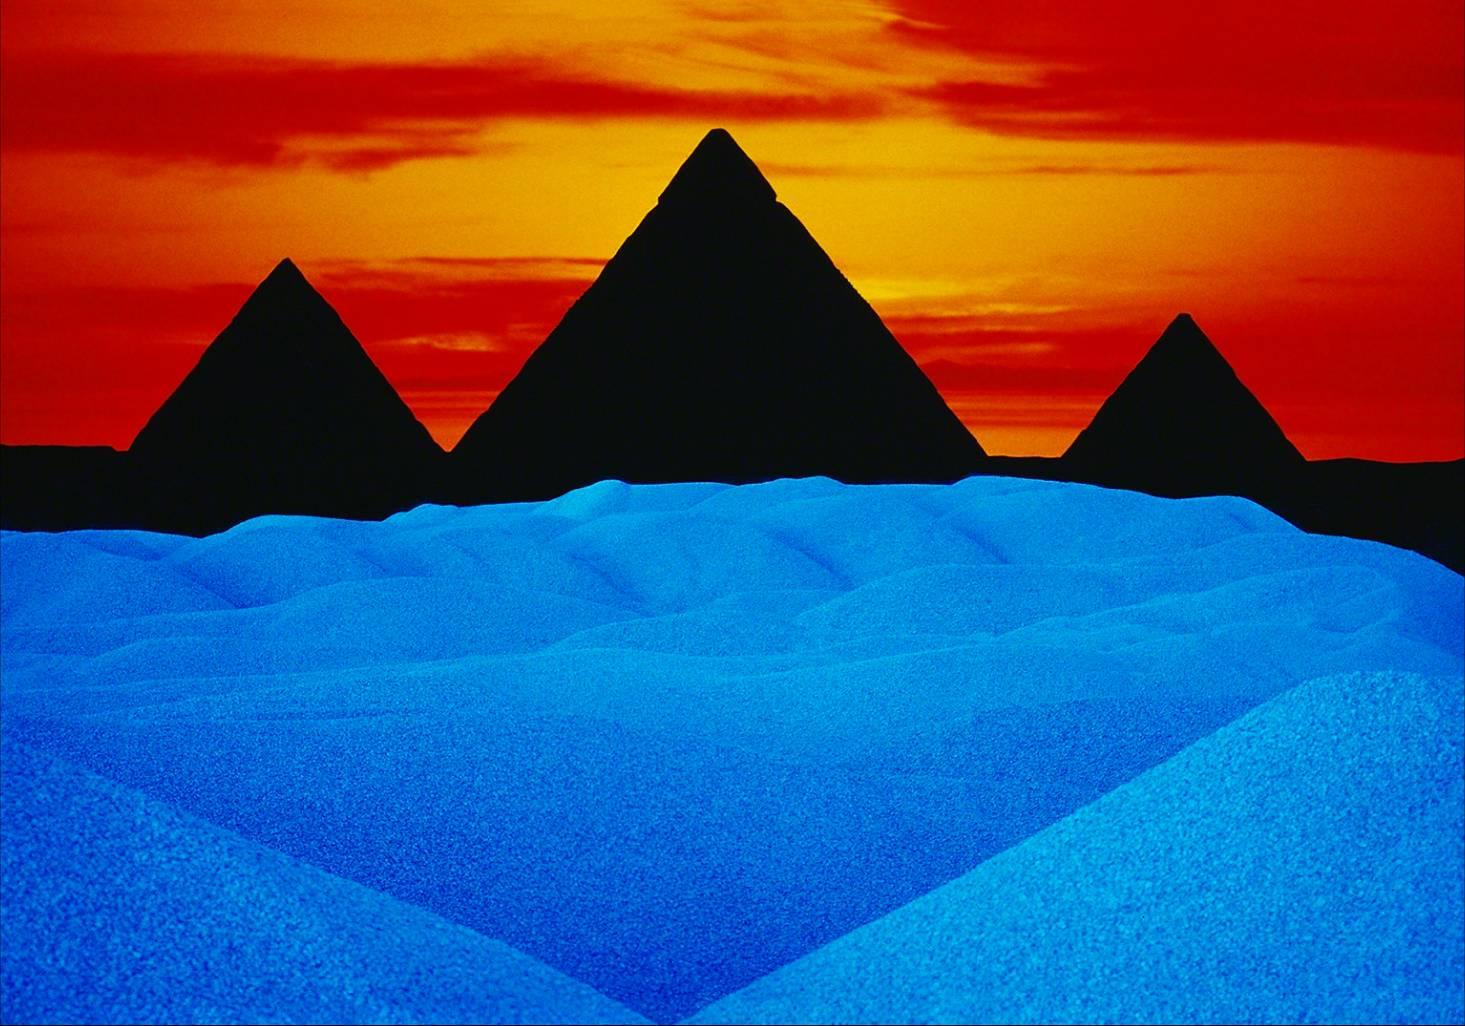 Mitchell Funk Color Photograph - Surreal LandScape Photograph Four Pyramids, Cover Popular Photography Magazin